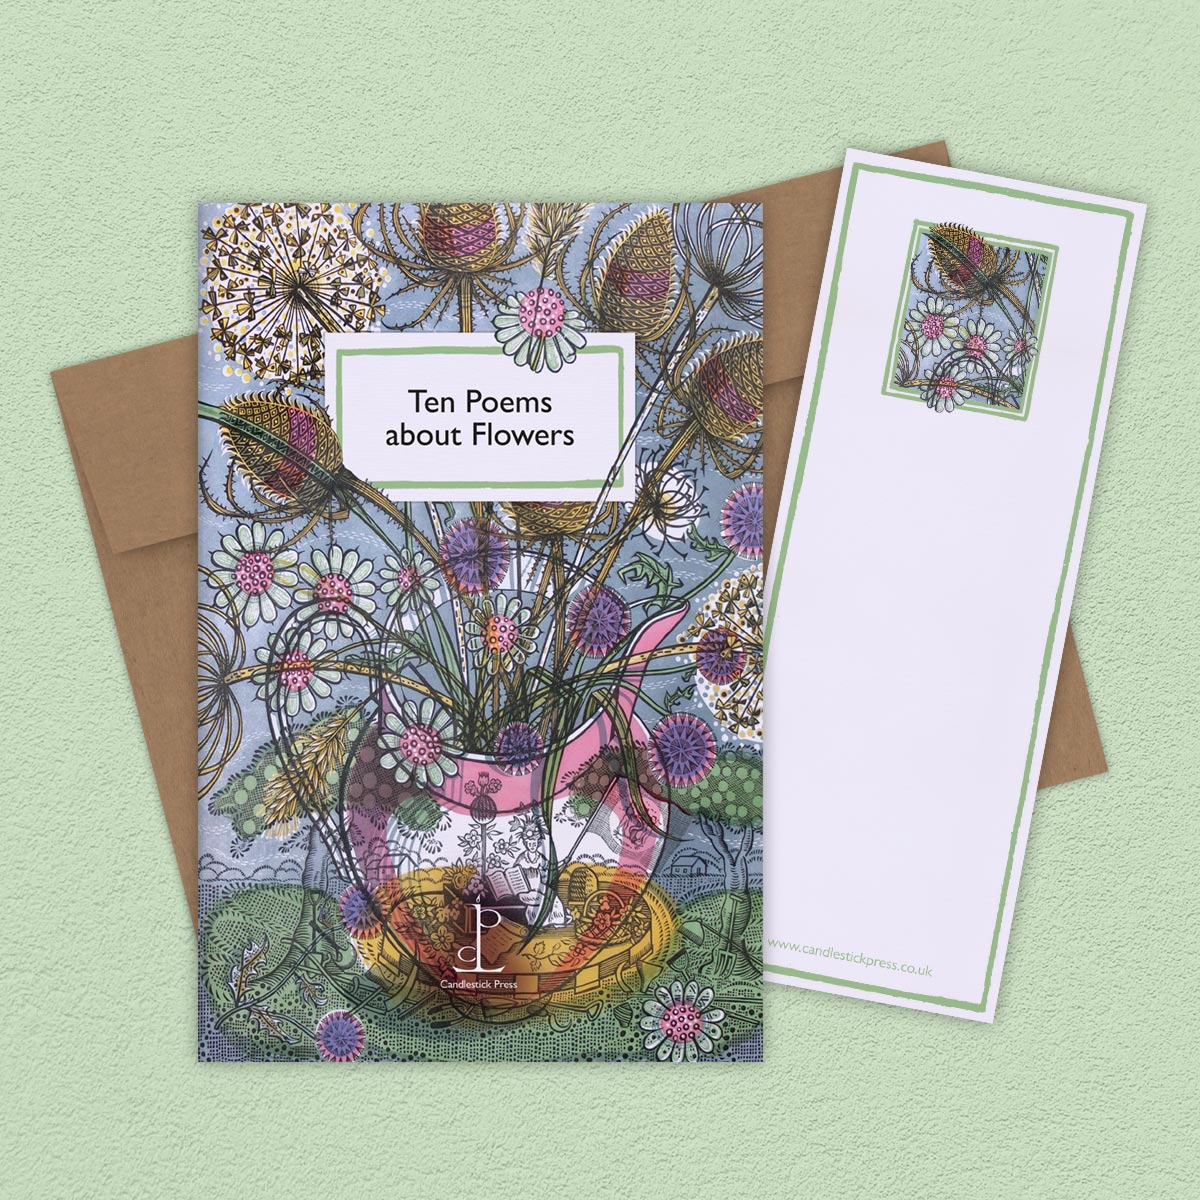 The Poem Pamphlet, 'Ten Poems about Flowers' sits on a light green background with the bookmark and brown envelope.